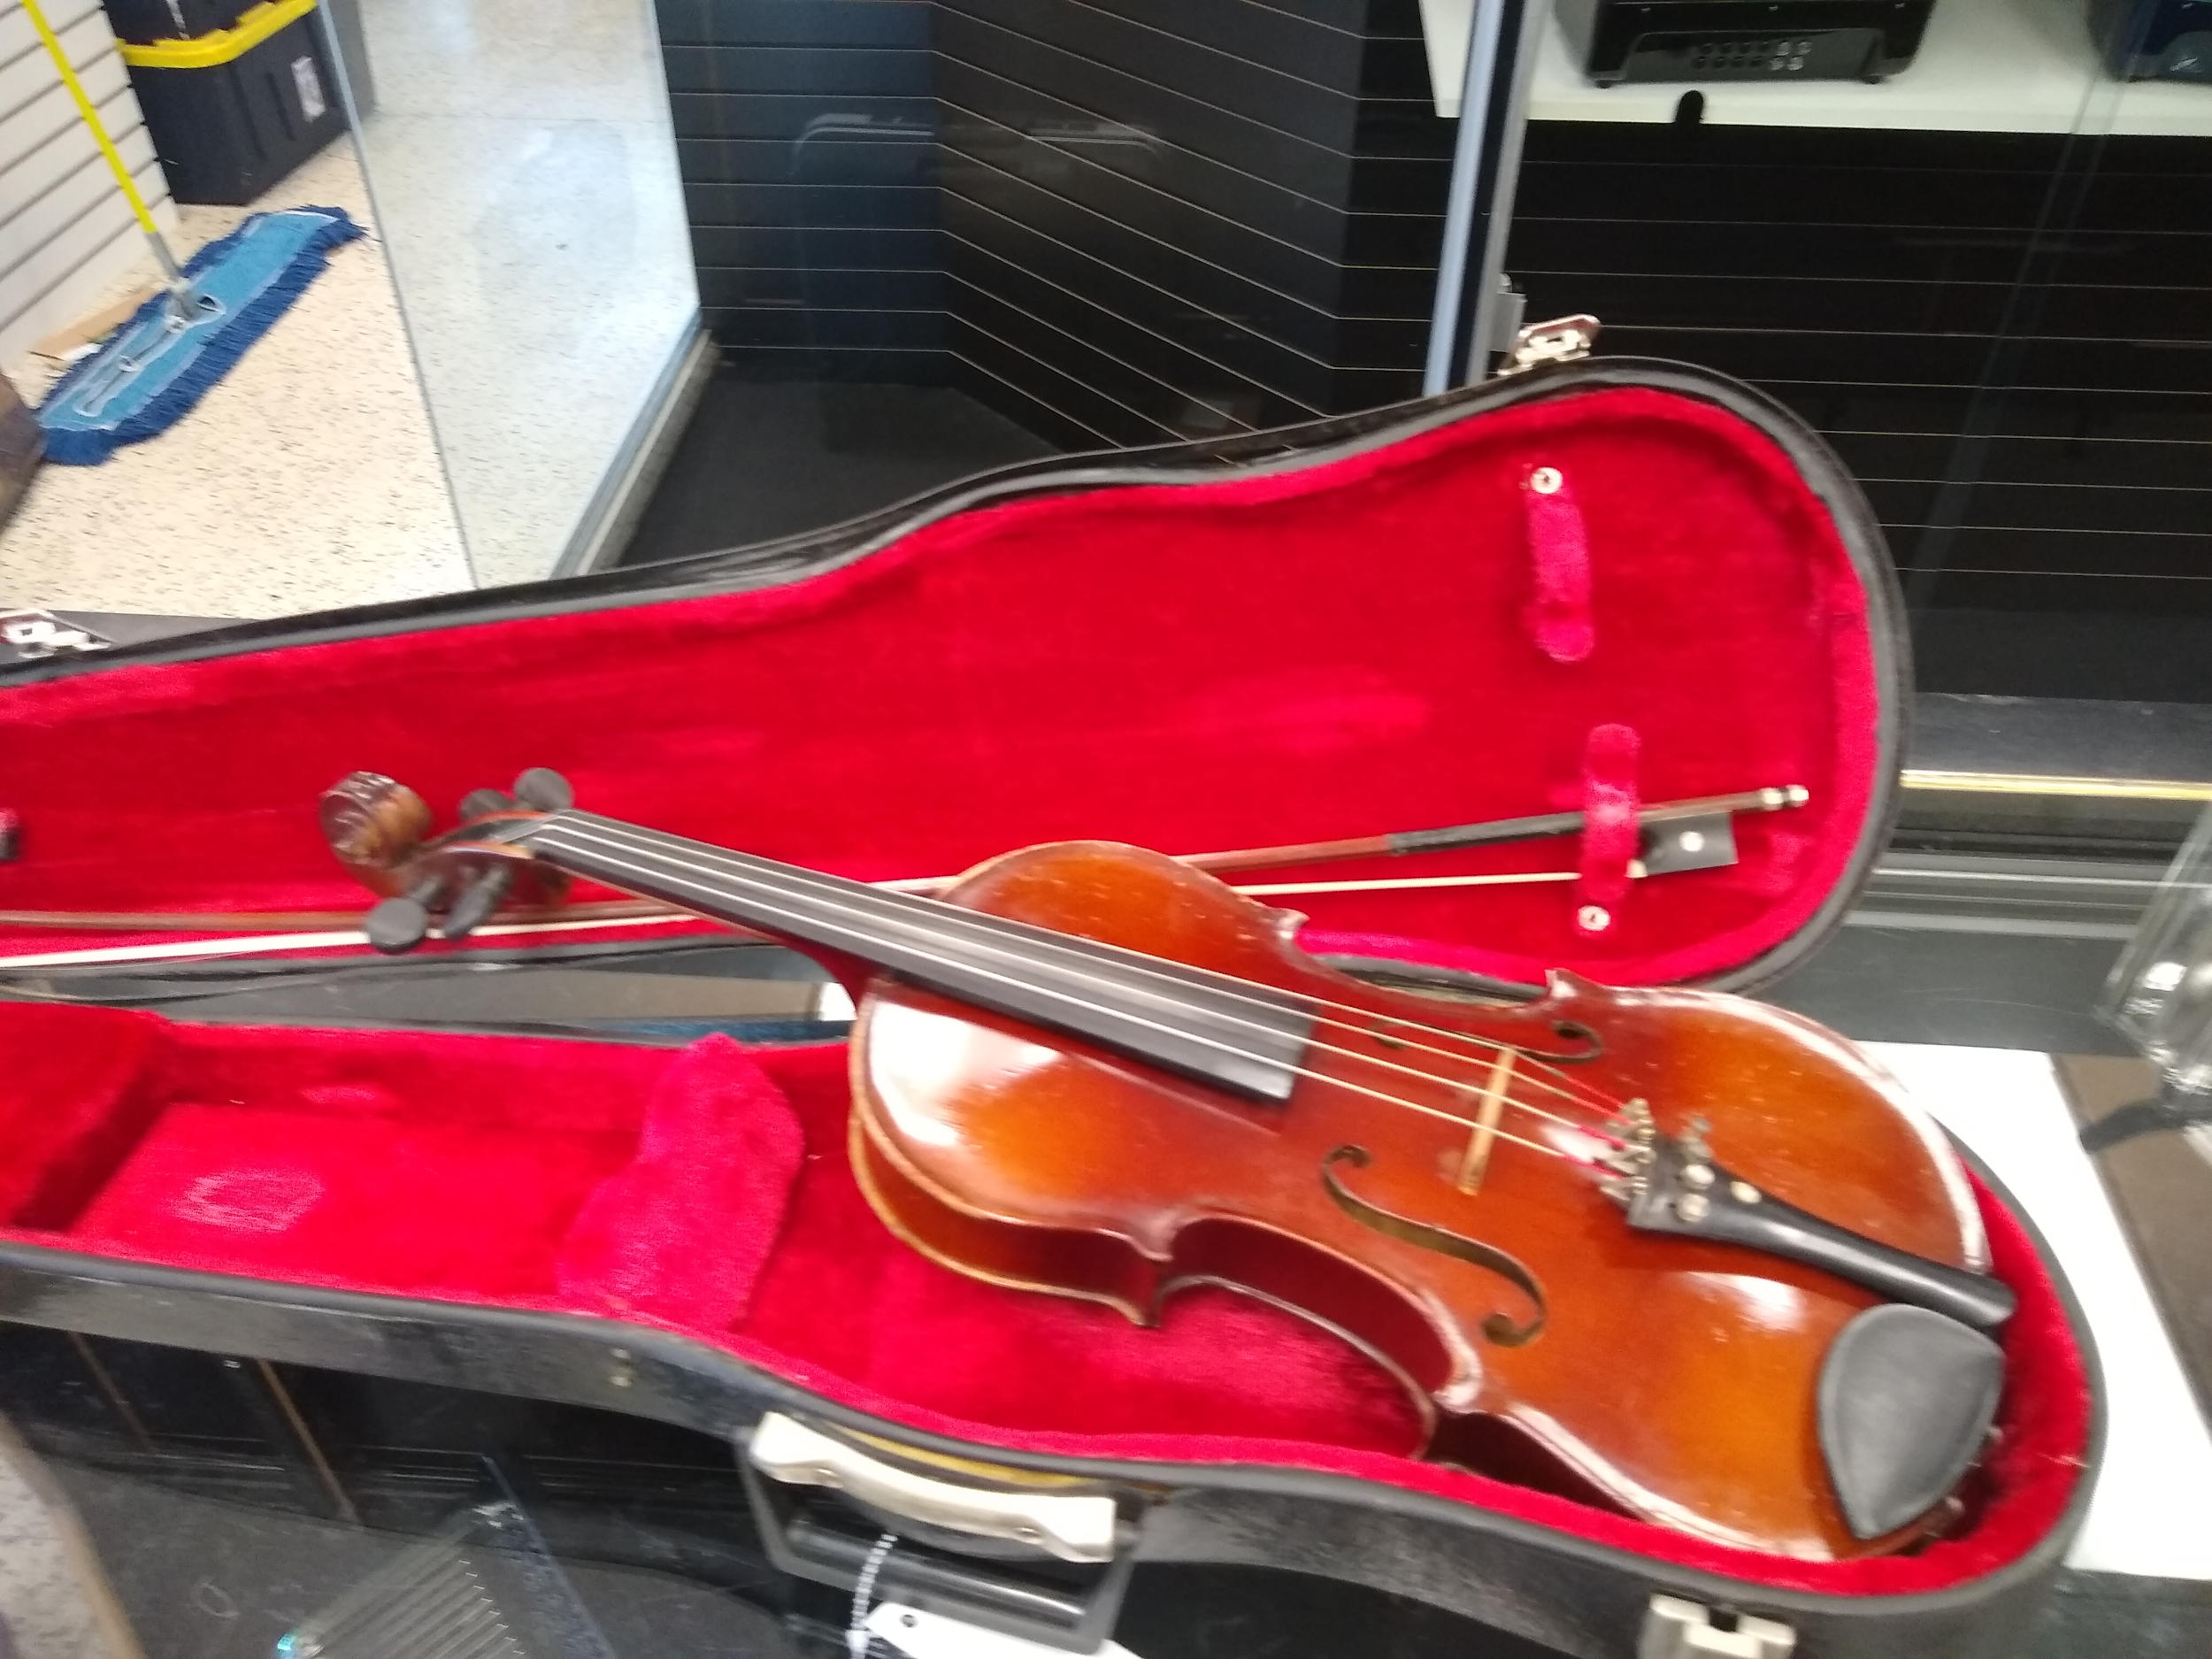 Old 4/4 Violin Probable Made in Germany